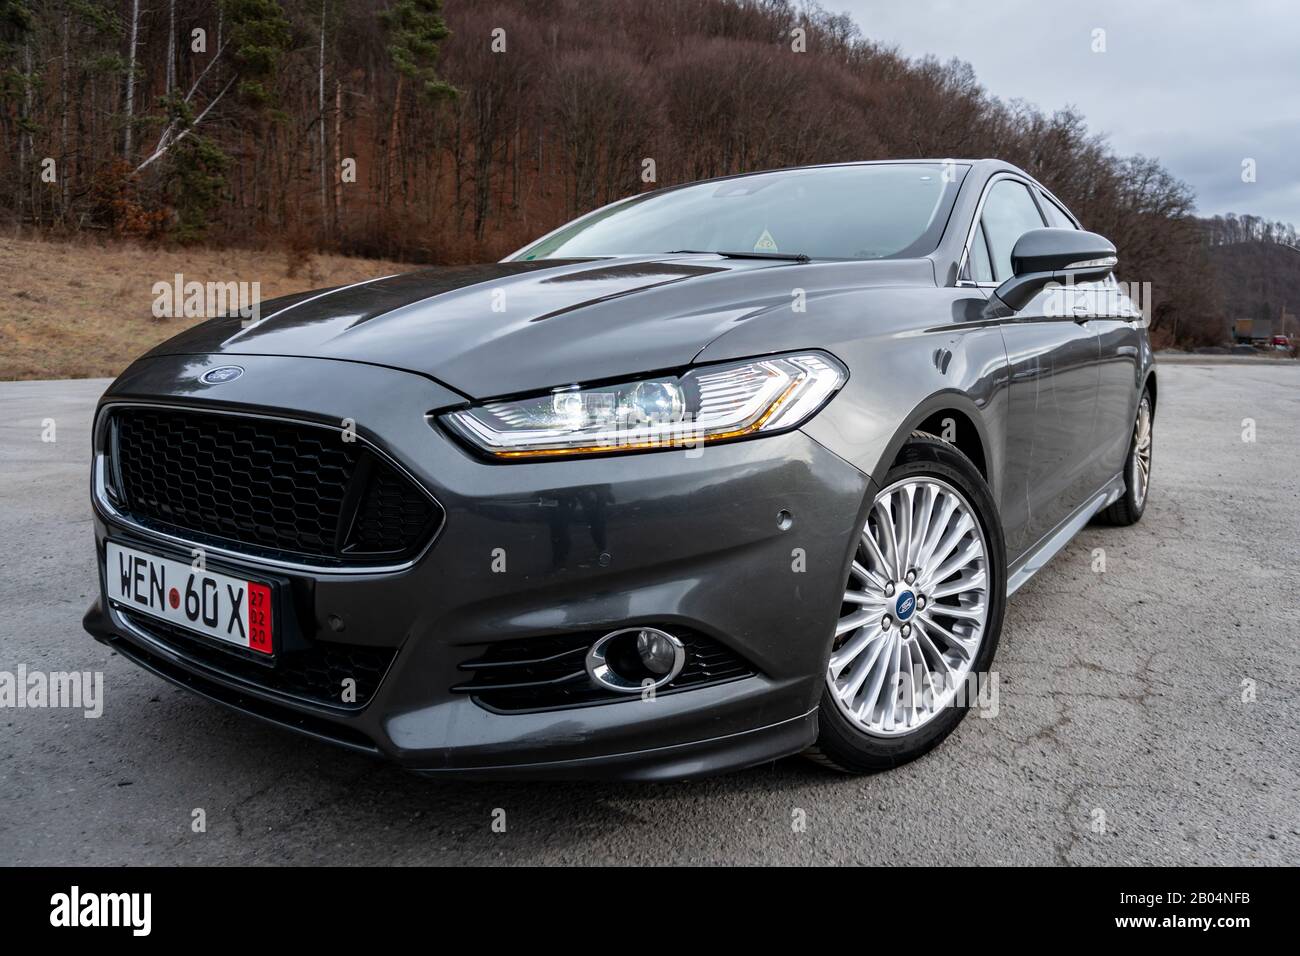 Cluj-Napoca,Cluj/Romania-01.31.2020-Ford Mondeo MK5 Sport edition with  dynamic led headlights, sport front bumper, 18 inch alloy wheels, Aston  Martin Stock Photo - Alamy